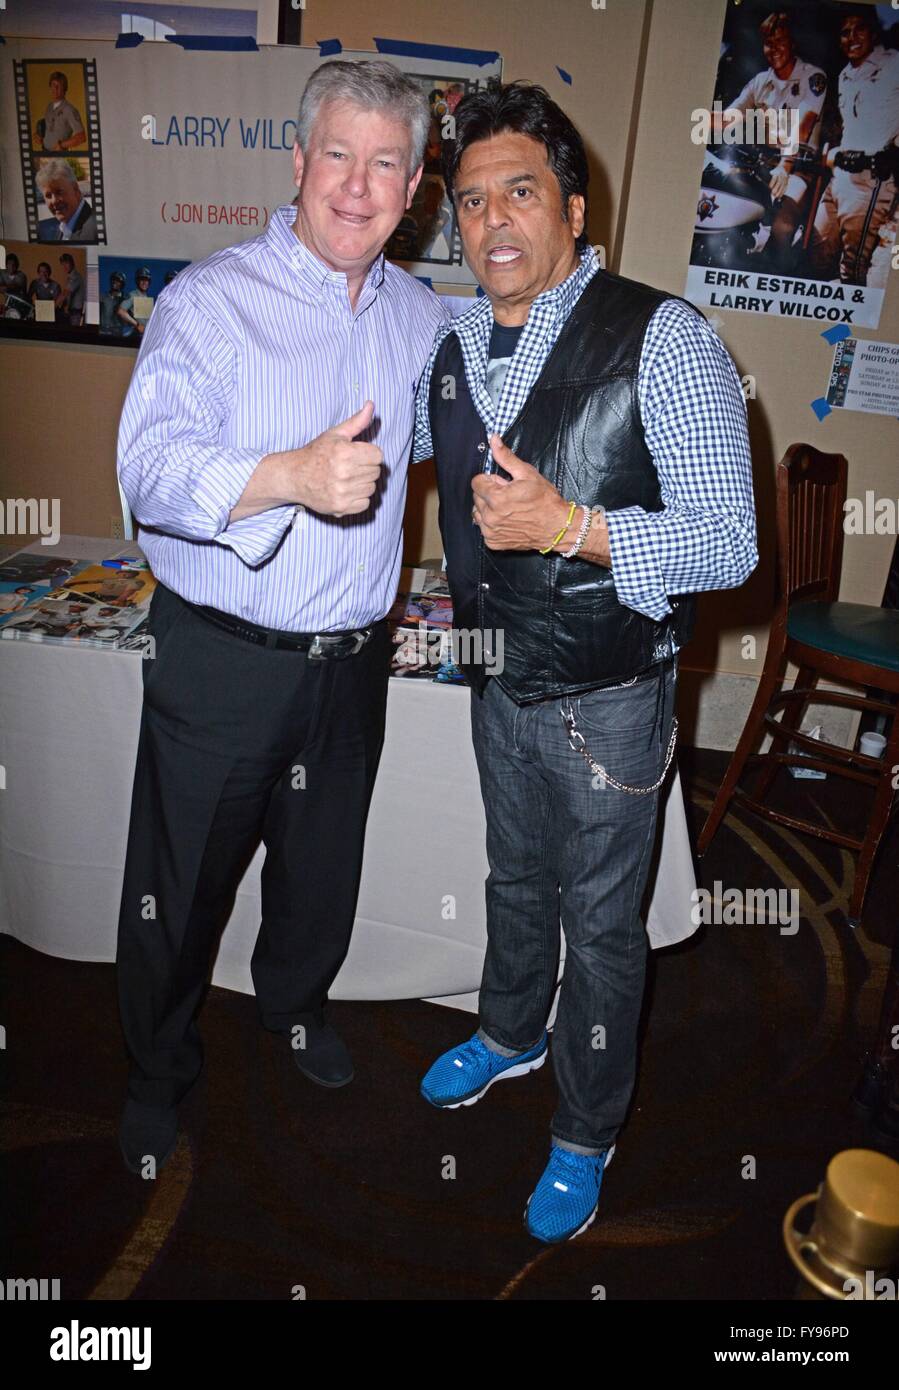 Parsippany, NJ, USA. 23rd Apr, 2016. Larry Wilcox, Erik Estrada in attendance for Chiller Theatre Toy, Model and Film Expo, Sheraton Parsippany, Parsippany, NJ April 23, 2016. Credit:  Derek Storm/Everett Collection/Alamy Live News Stock Photo